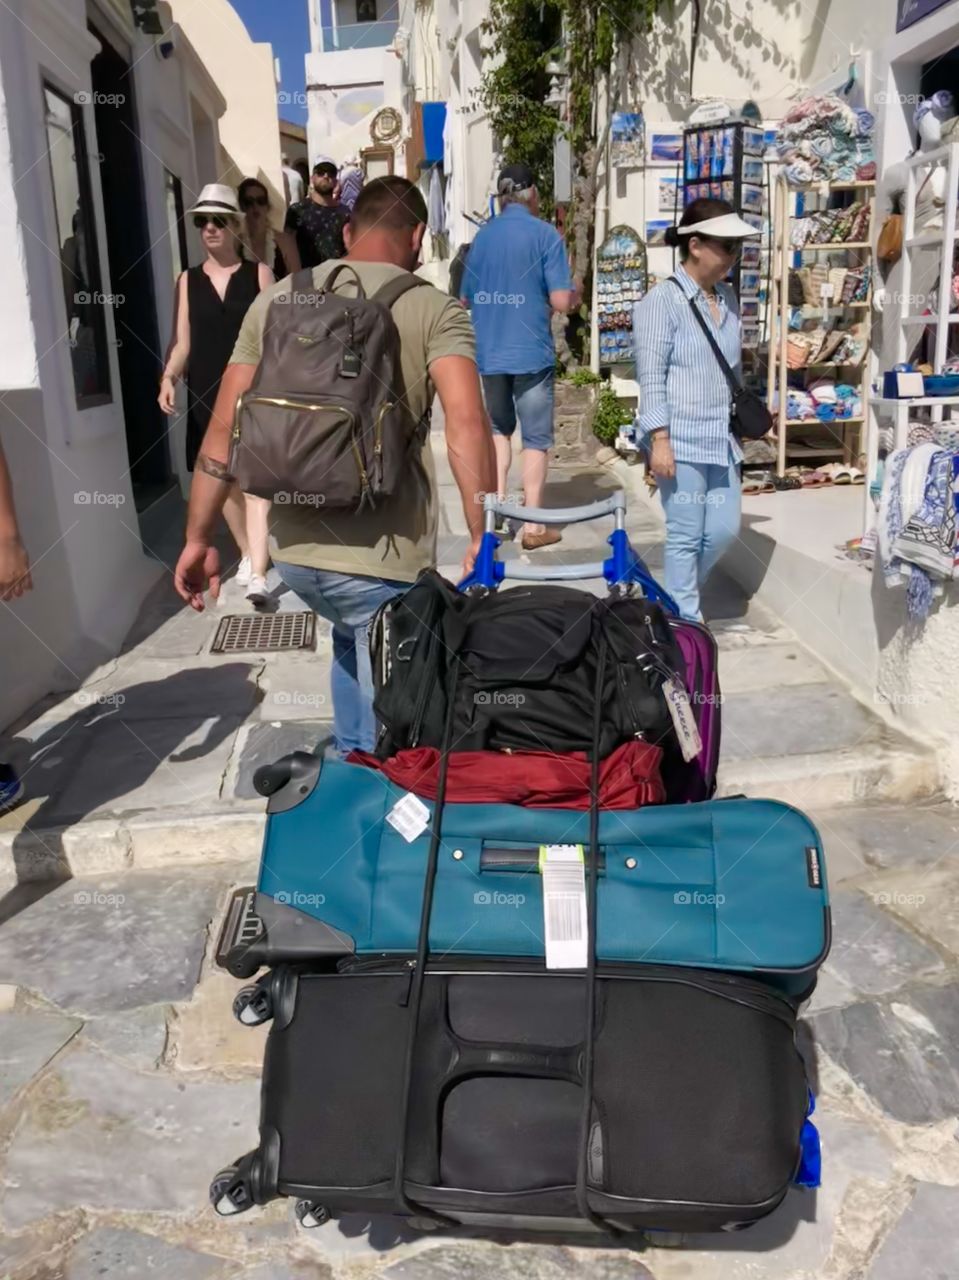 There are no roads in Santorini meaning you have a currier carrying suitcases to your AirBnb. 